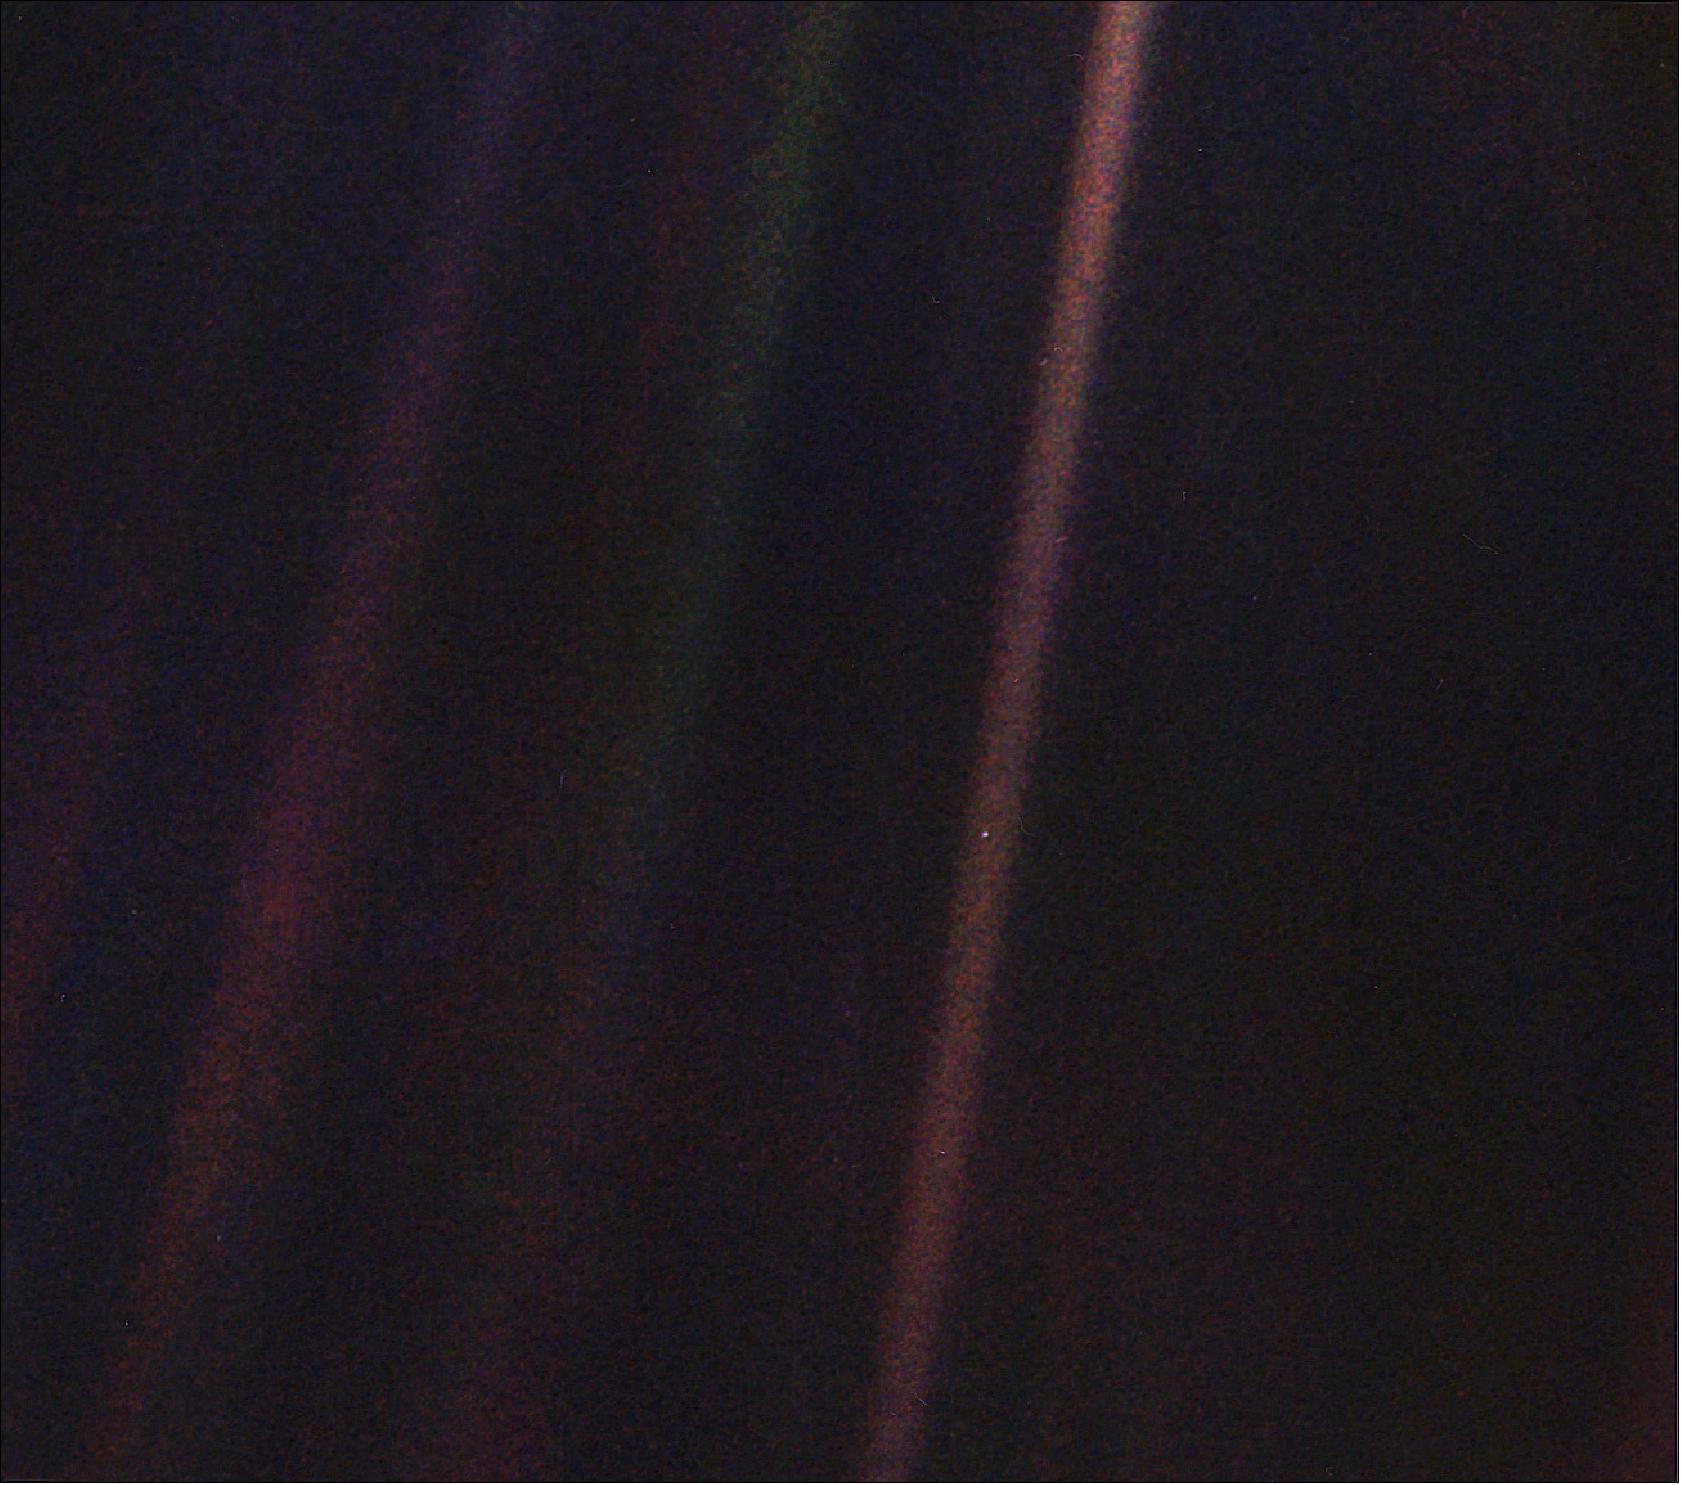 Figure 9: The Pale Blue Dot is a photograph of Earth taken Feb. 14, 1990, by NASA’s Voyager 1 at a distance of 3.7 billion miles (6 billion kilometers) from the Sun. The image inspired the title of scientist Carl Sagan's book, "Pale Blue Dot: A Vision of the Human Future in Space," in which he wrote: "Look again at that dot. That's here. That's home. That's us." (image credit: NASA/JPL-Caltech)